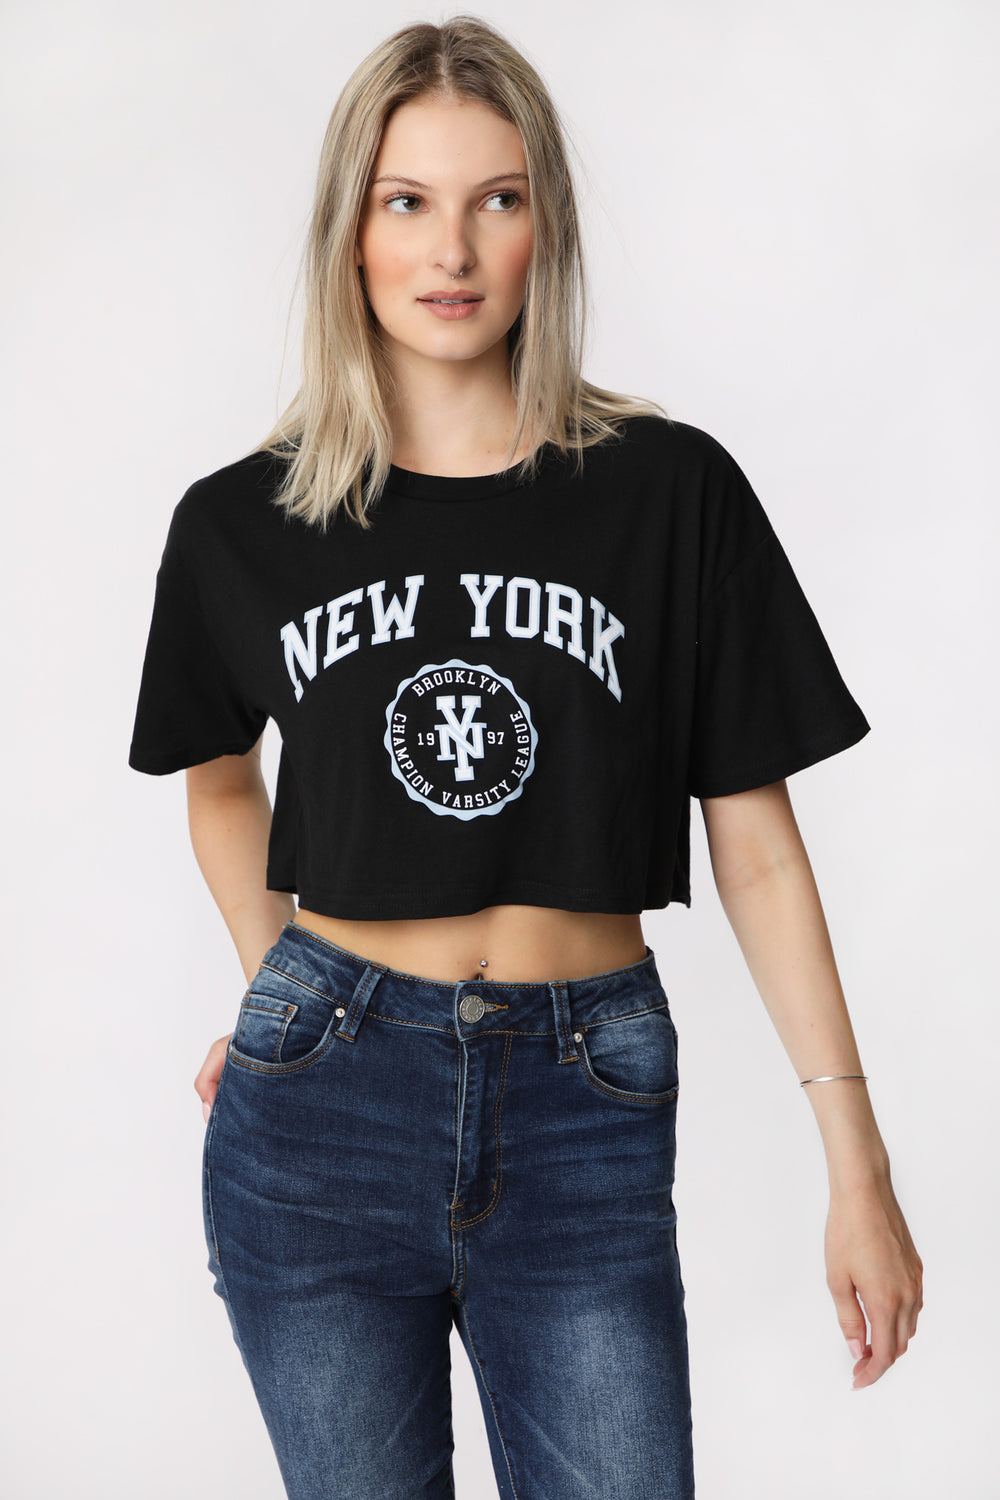 Womens New York Cropped Tee Womens New York Cropped Tee